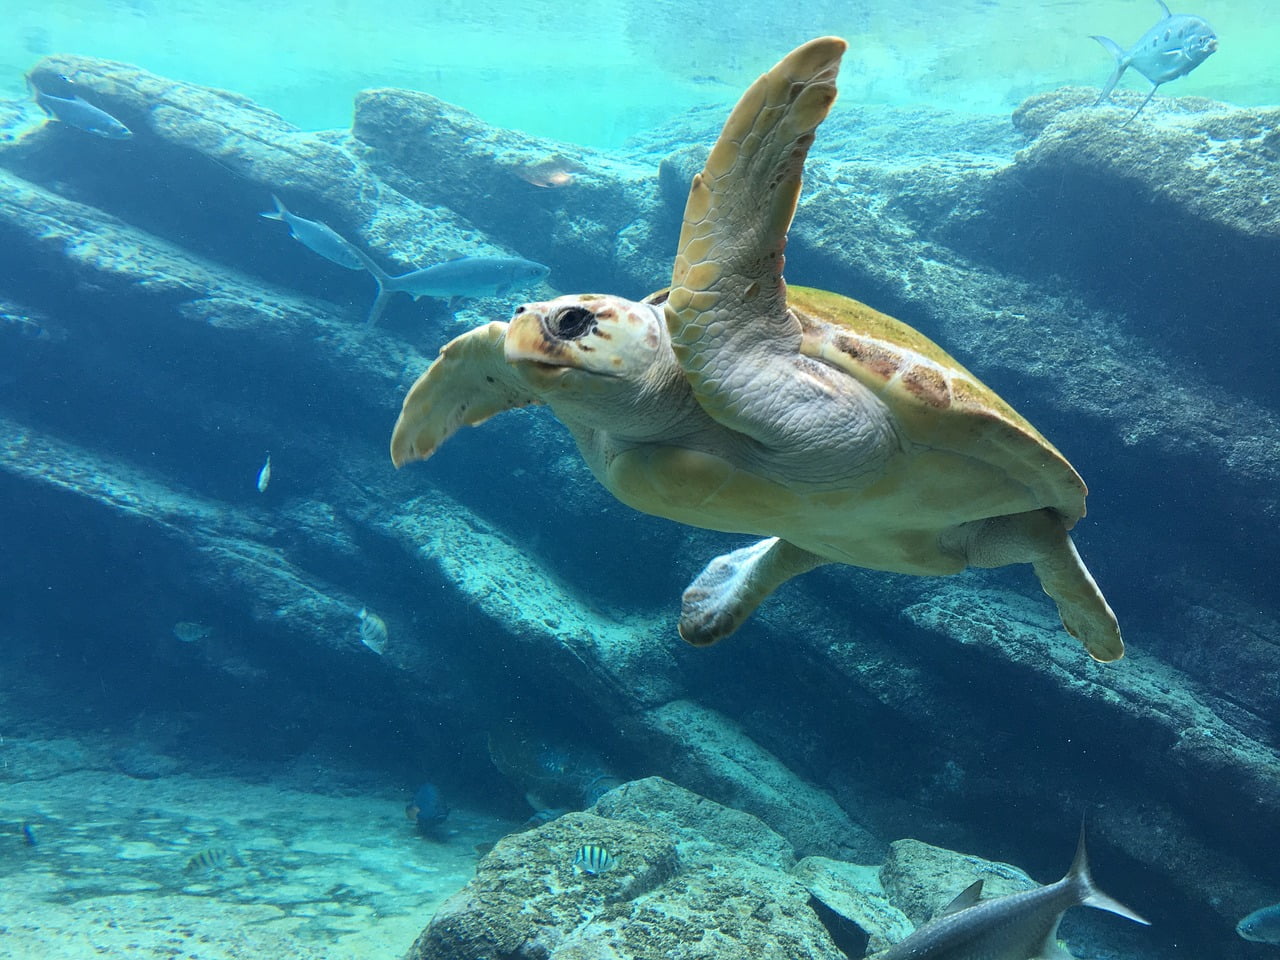 A new law has been established that helps protect sea turtles in Panama and provide the right to live and have free passage in a healthy environment.